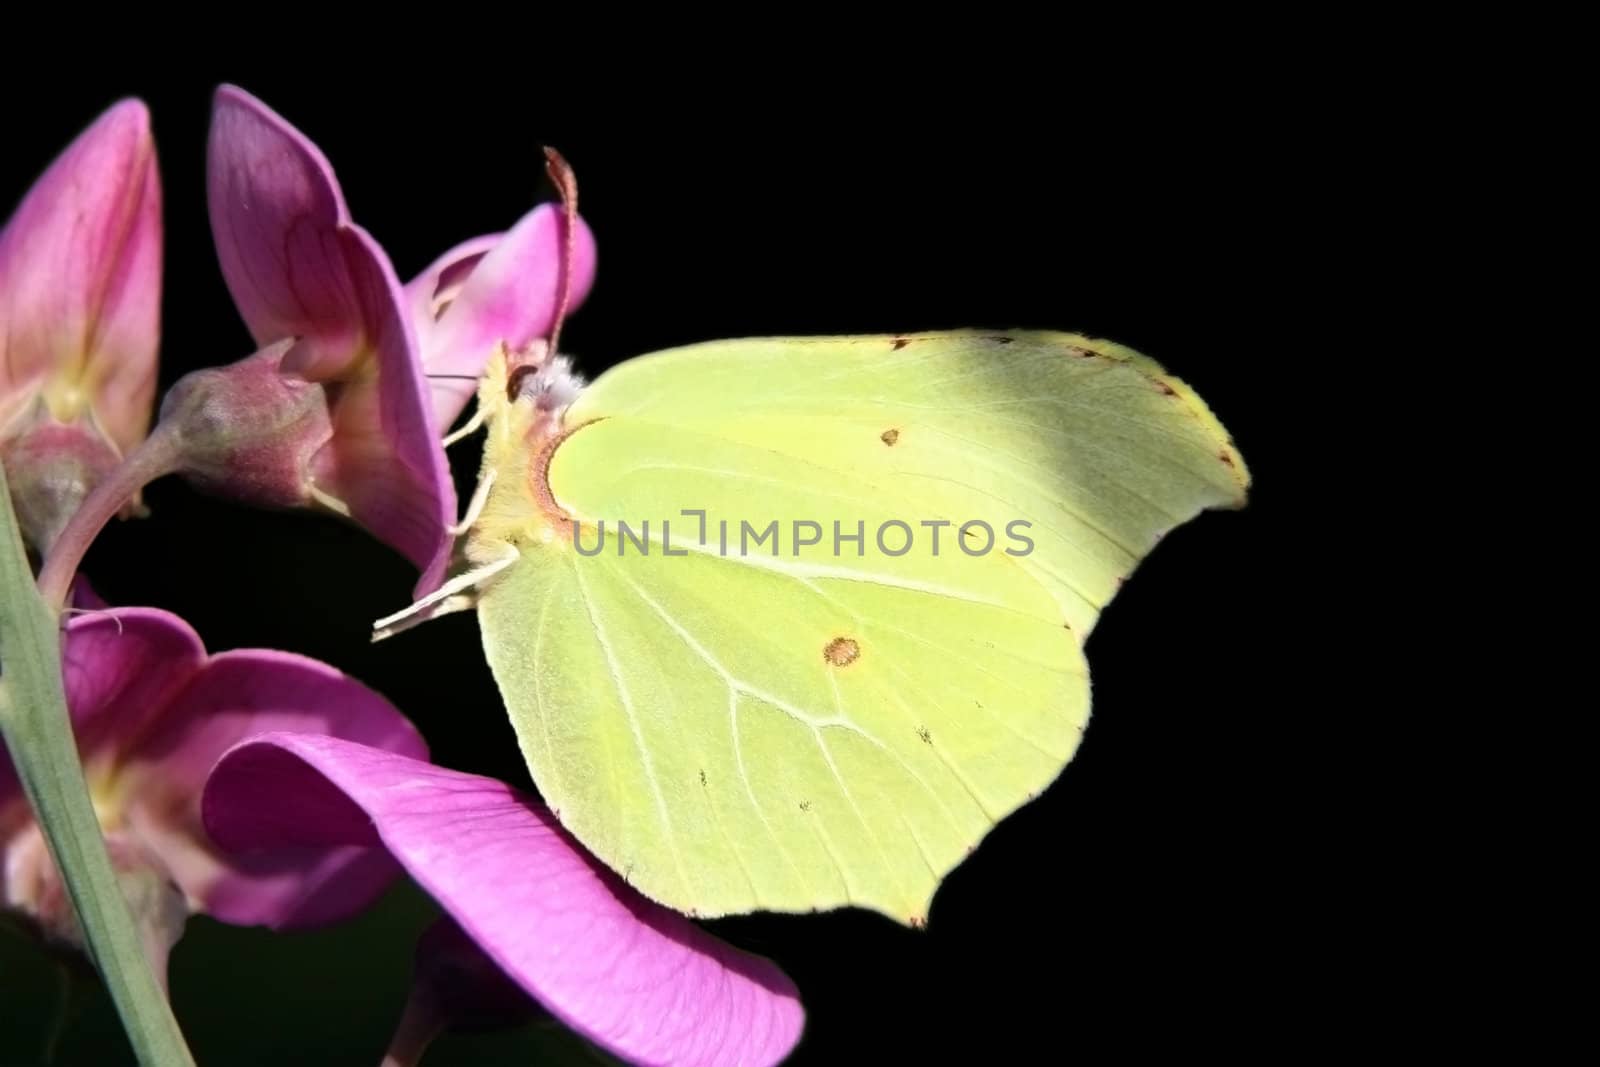 This image shows a macro from a brimstone butterfly